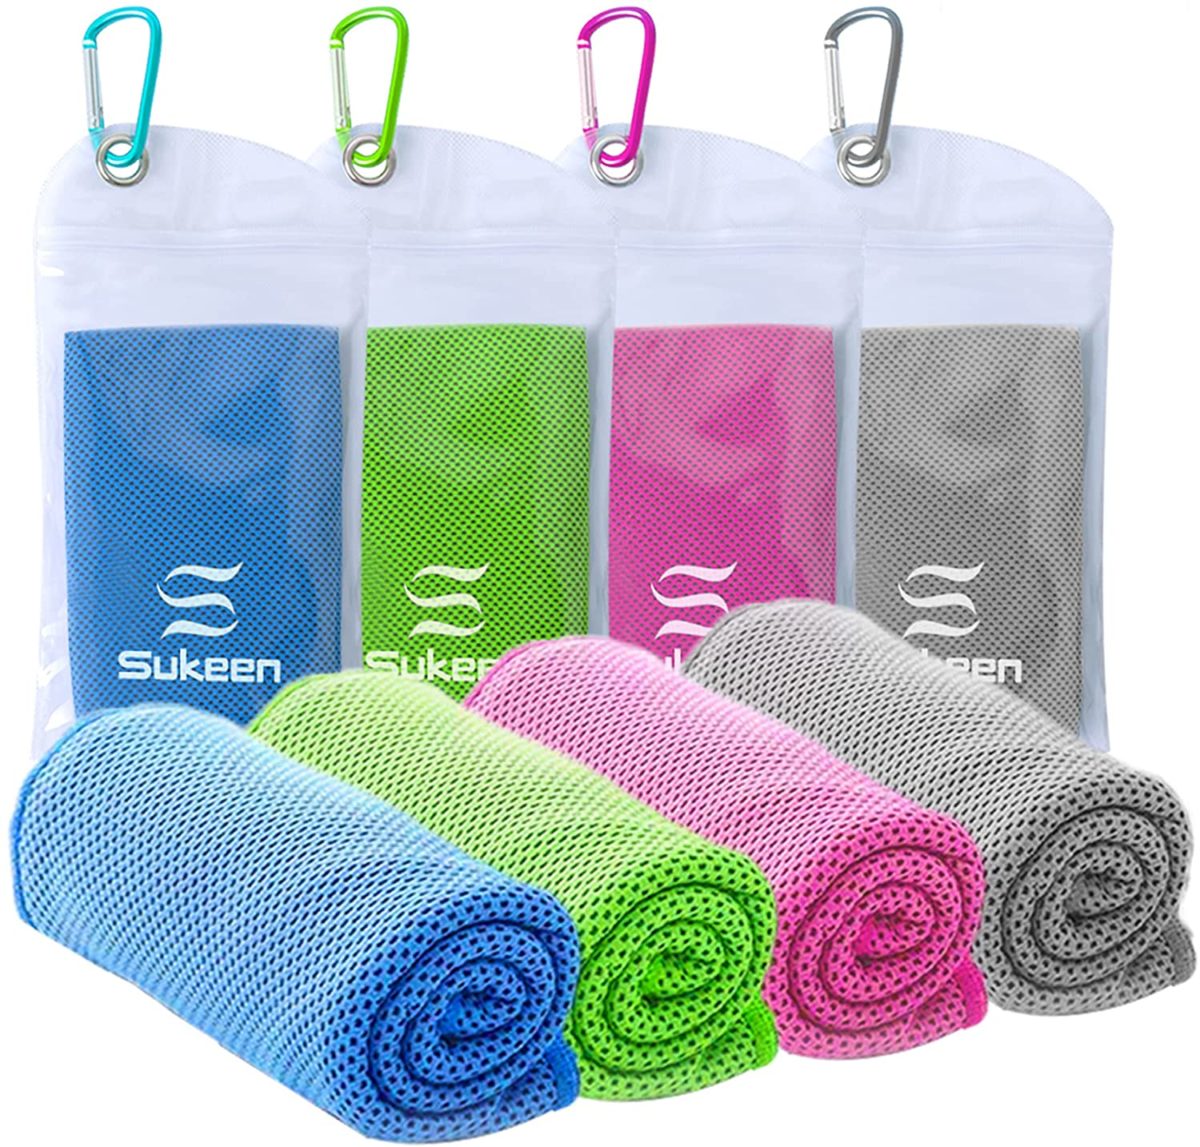 3 PACK CORDOVA CT400 COLDSNAP COOLING TOWEL PINK COOL NECK TOWEL SPORTS NEW 